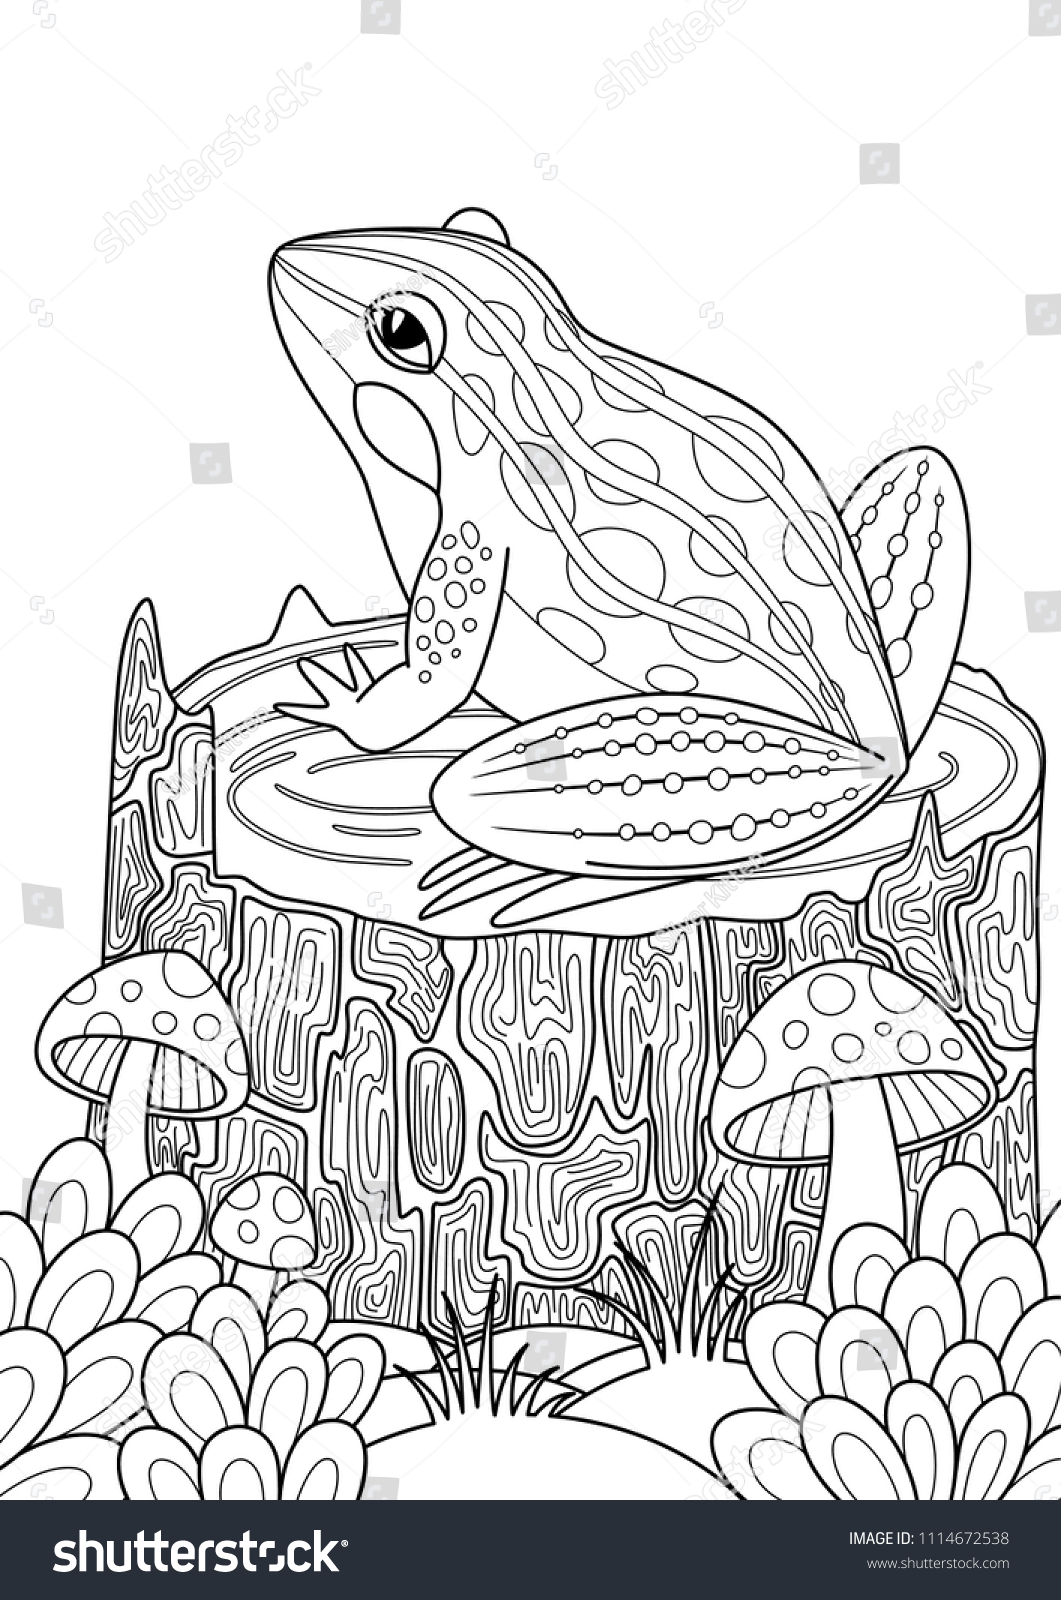 Vector doodle coloring book page frog stock vector royalty free